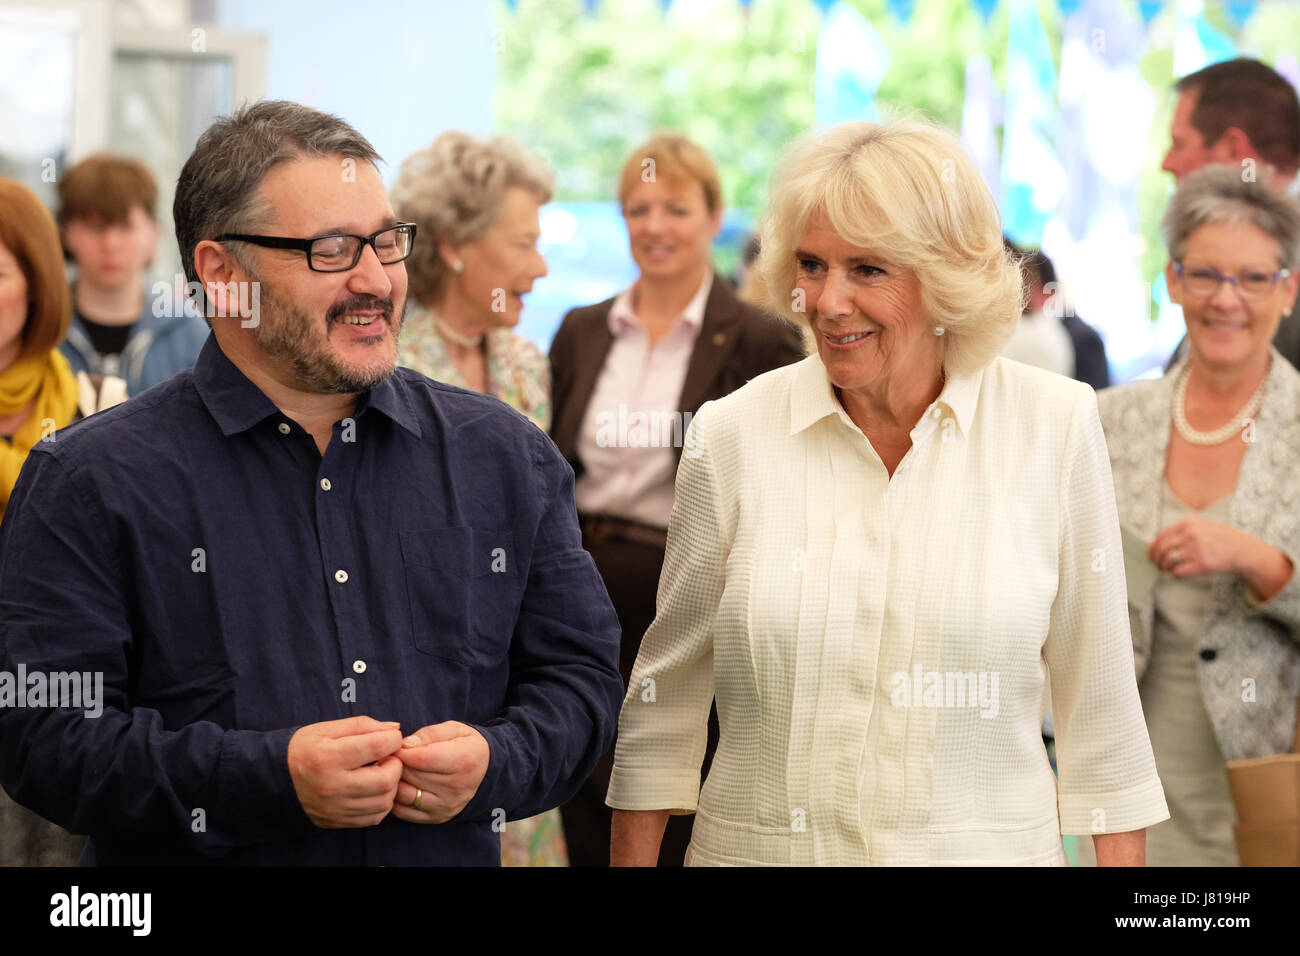 Hay Festival 2017 - Hay on Wye, Wales, UK - Friday 26th May 2017 - HRH Camilla Duchess of Cornwall arrives at the Hay Festival and is seen with Peter Florence Director of the Hay Festival ( on left ) - the Hay Festival celebrates its 30th anniversary in 2017. Over 4,000 secondary school children will attend the second day of the literary festival that runs until June 4th.  Steven May / Alamy Live News Stock Photo